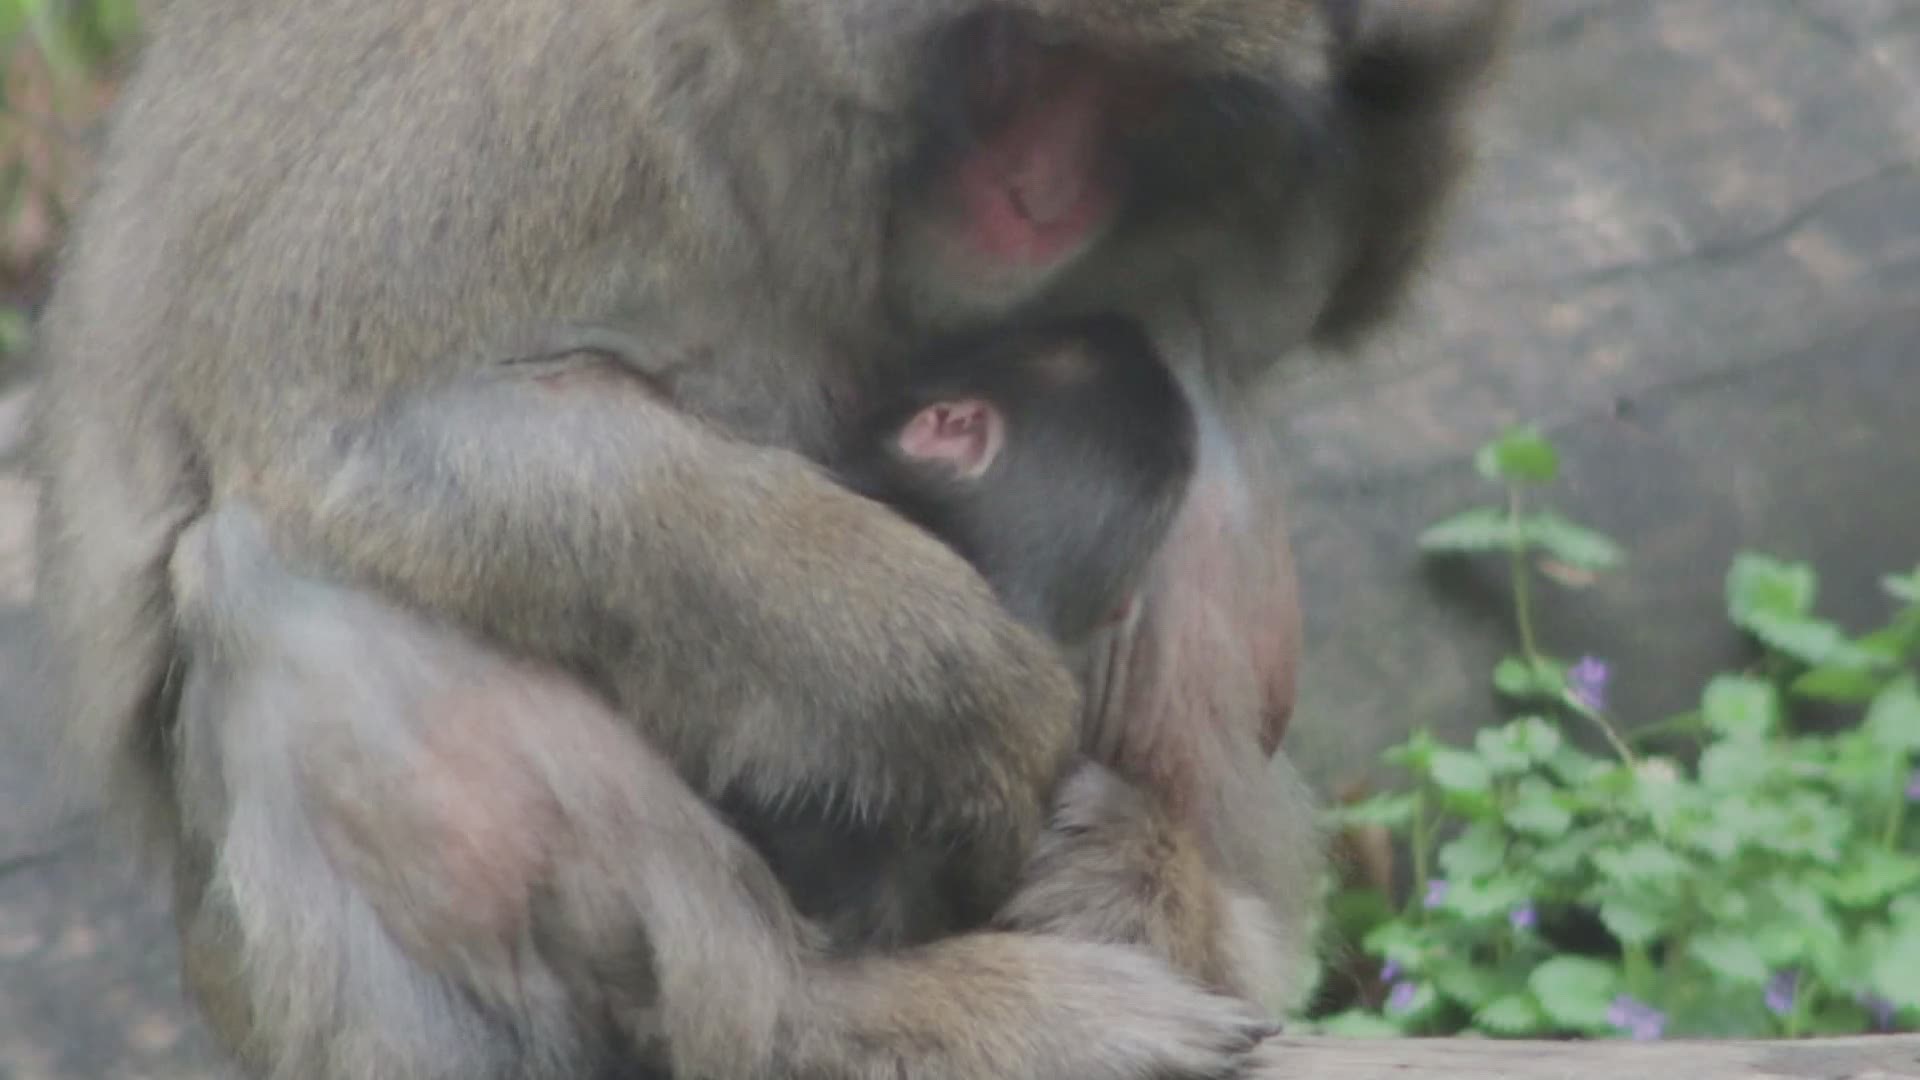 A male Japanese macaque, also known as a 'snow monkey' was born at Blank Park Zoo on May 13, 2020